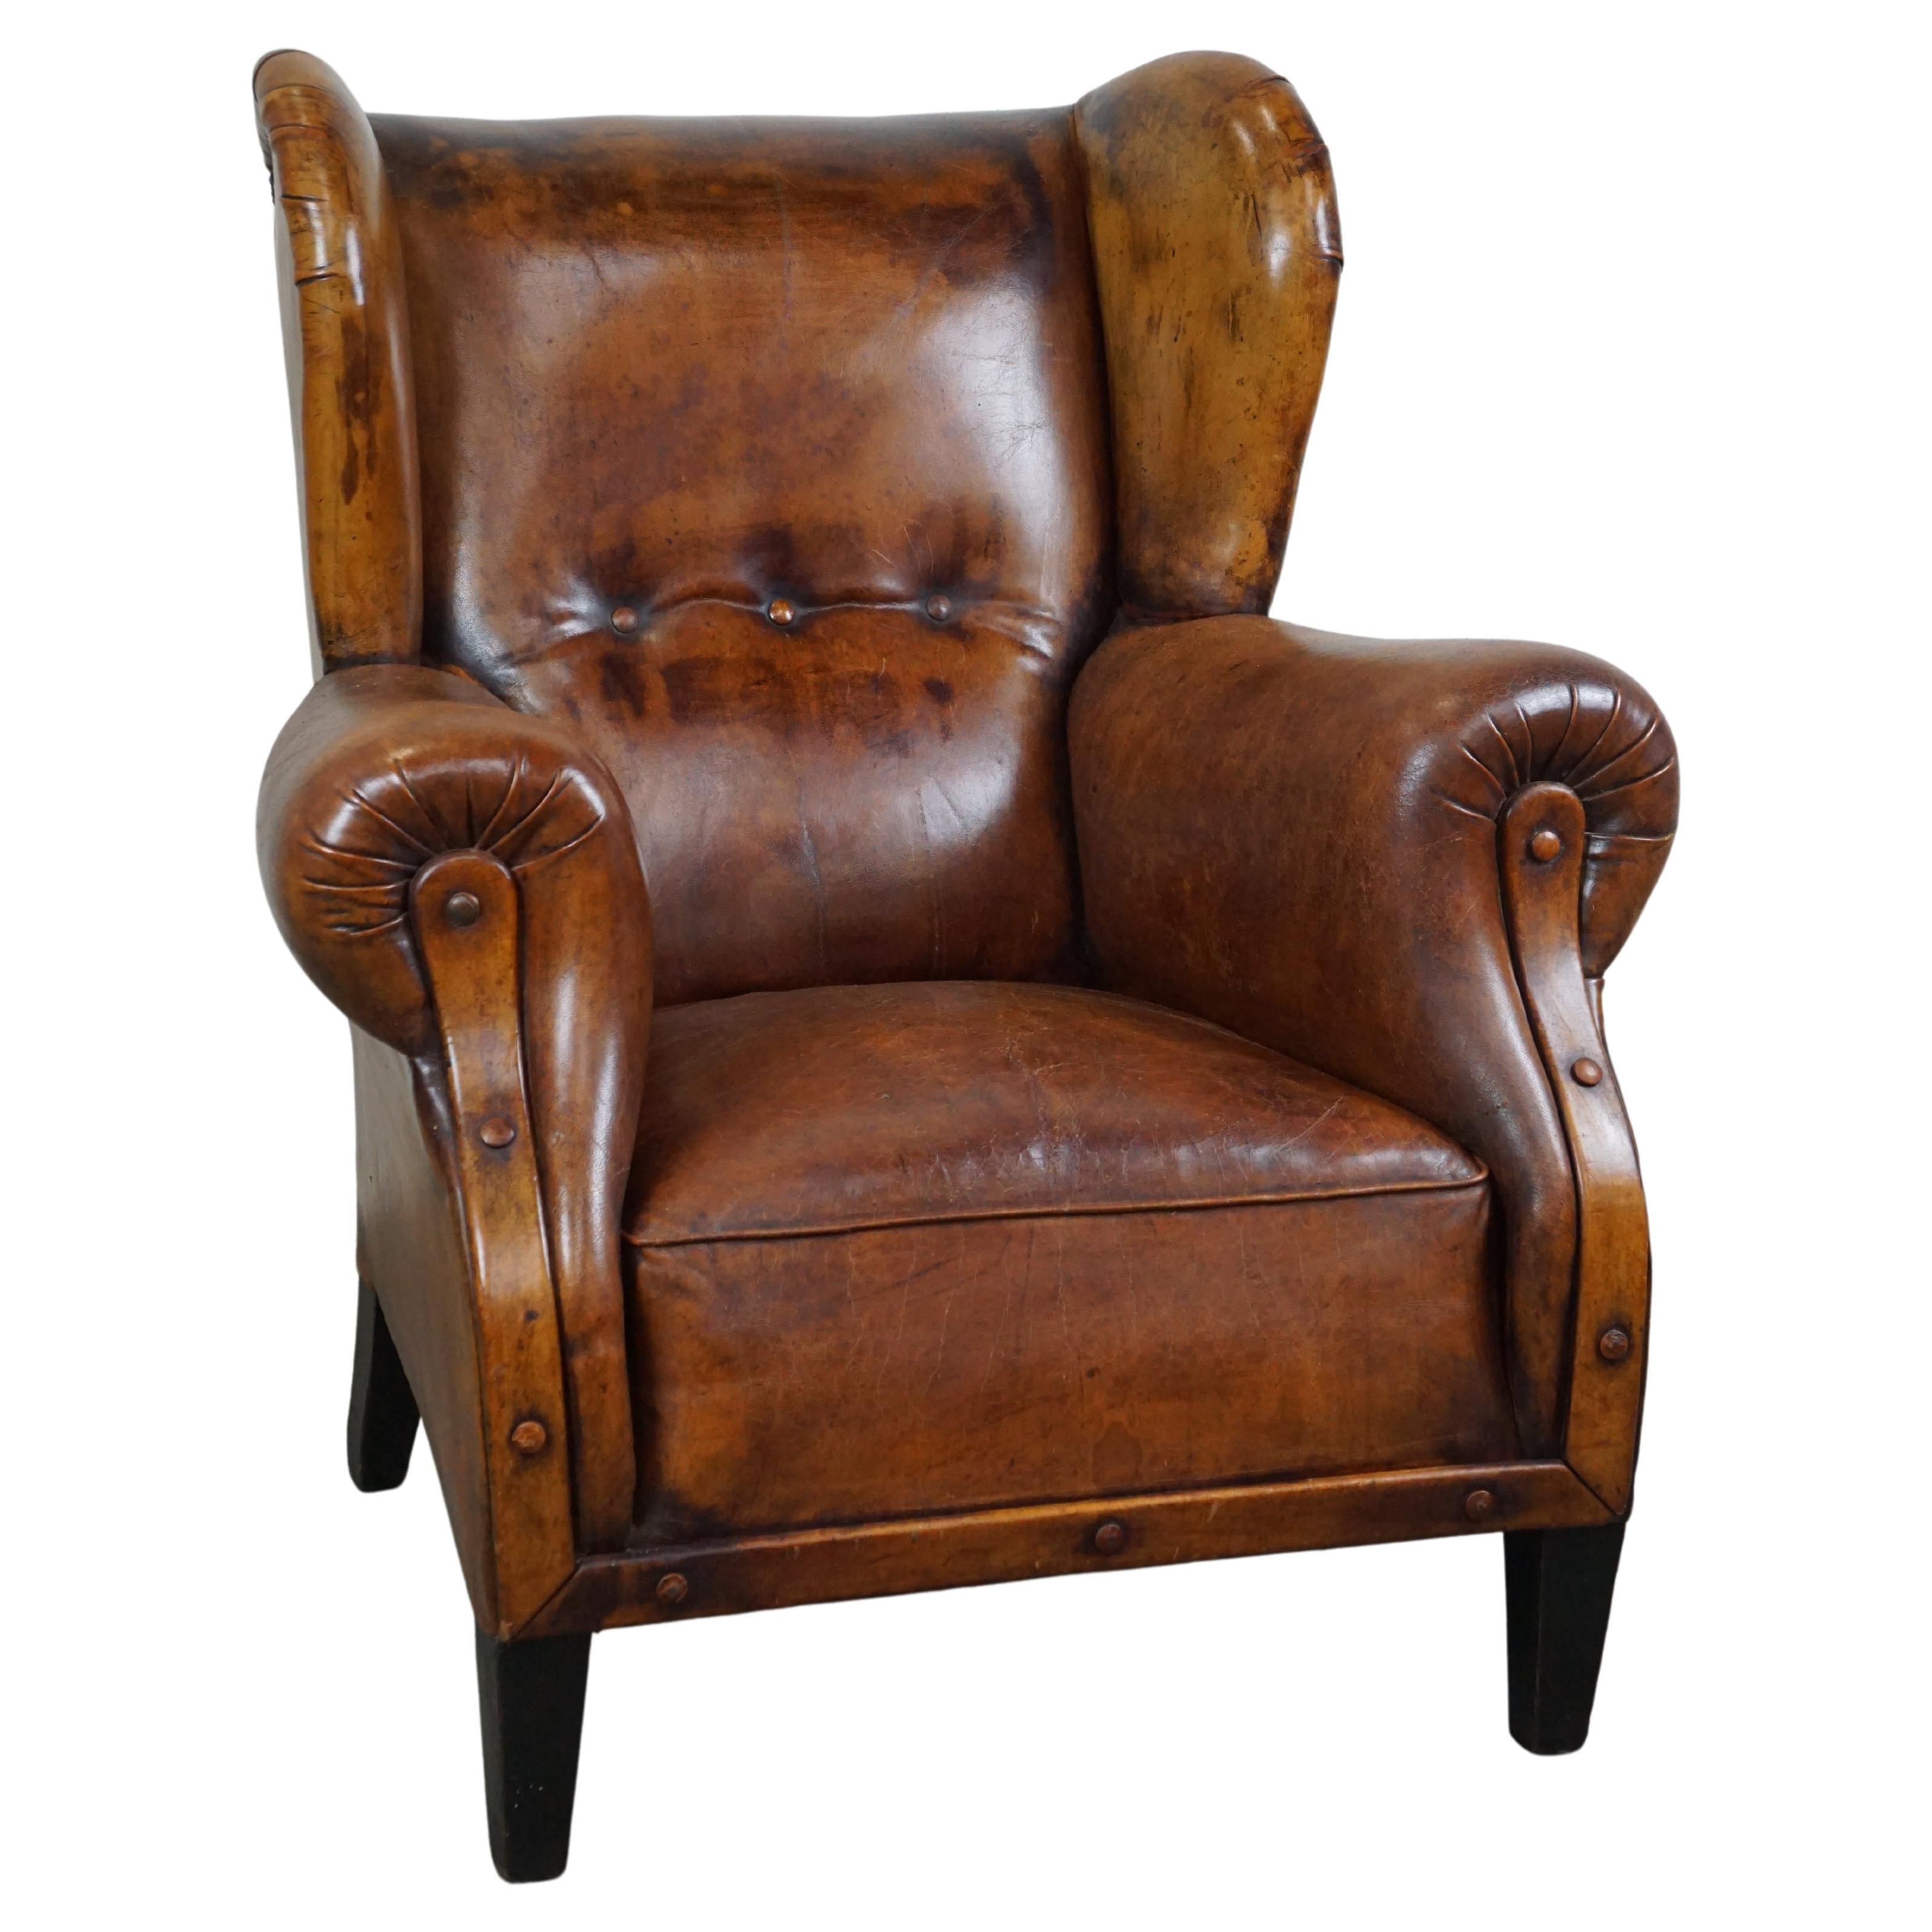 Irresistible old sheep leather wingback armchair with the most beautiful colors For Sale